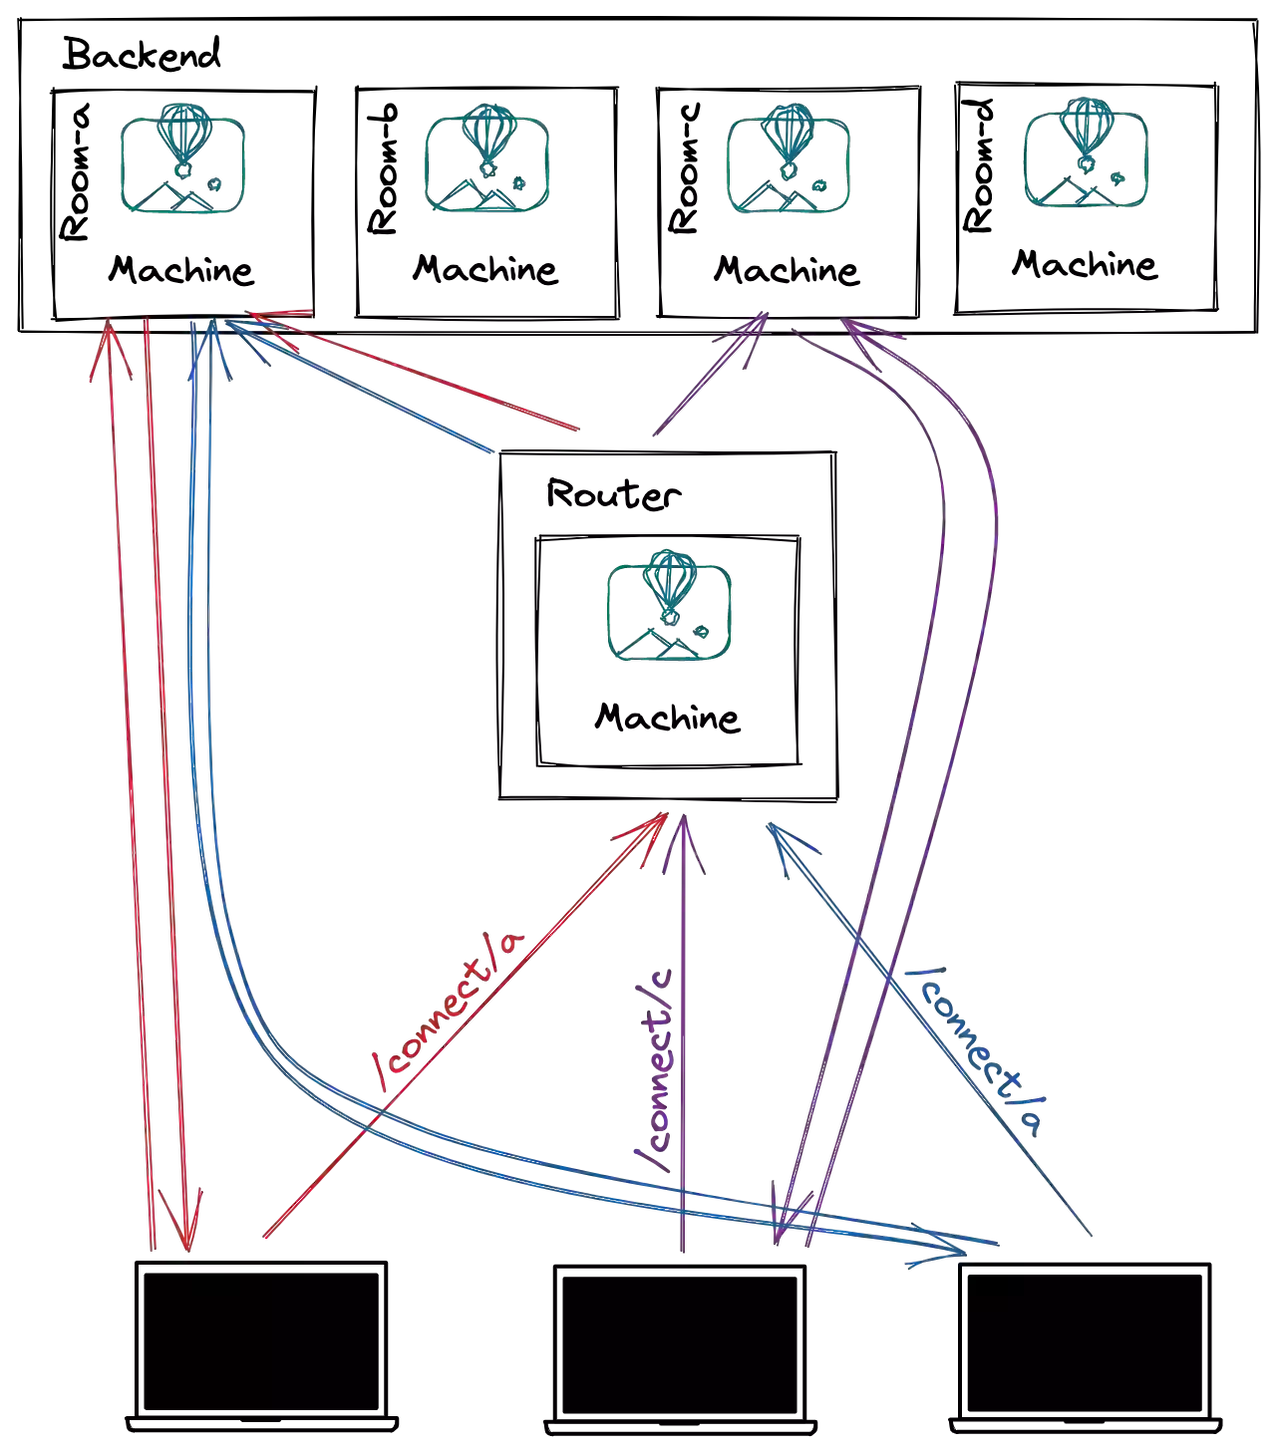 Diagram showing client computers connecting to a router Machine on Fly.io that passes on each connection request to a specific backend Machine, which responds directly to the client to establish a WebSocket connection.